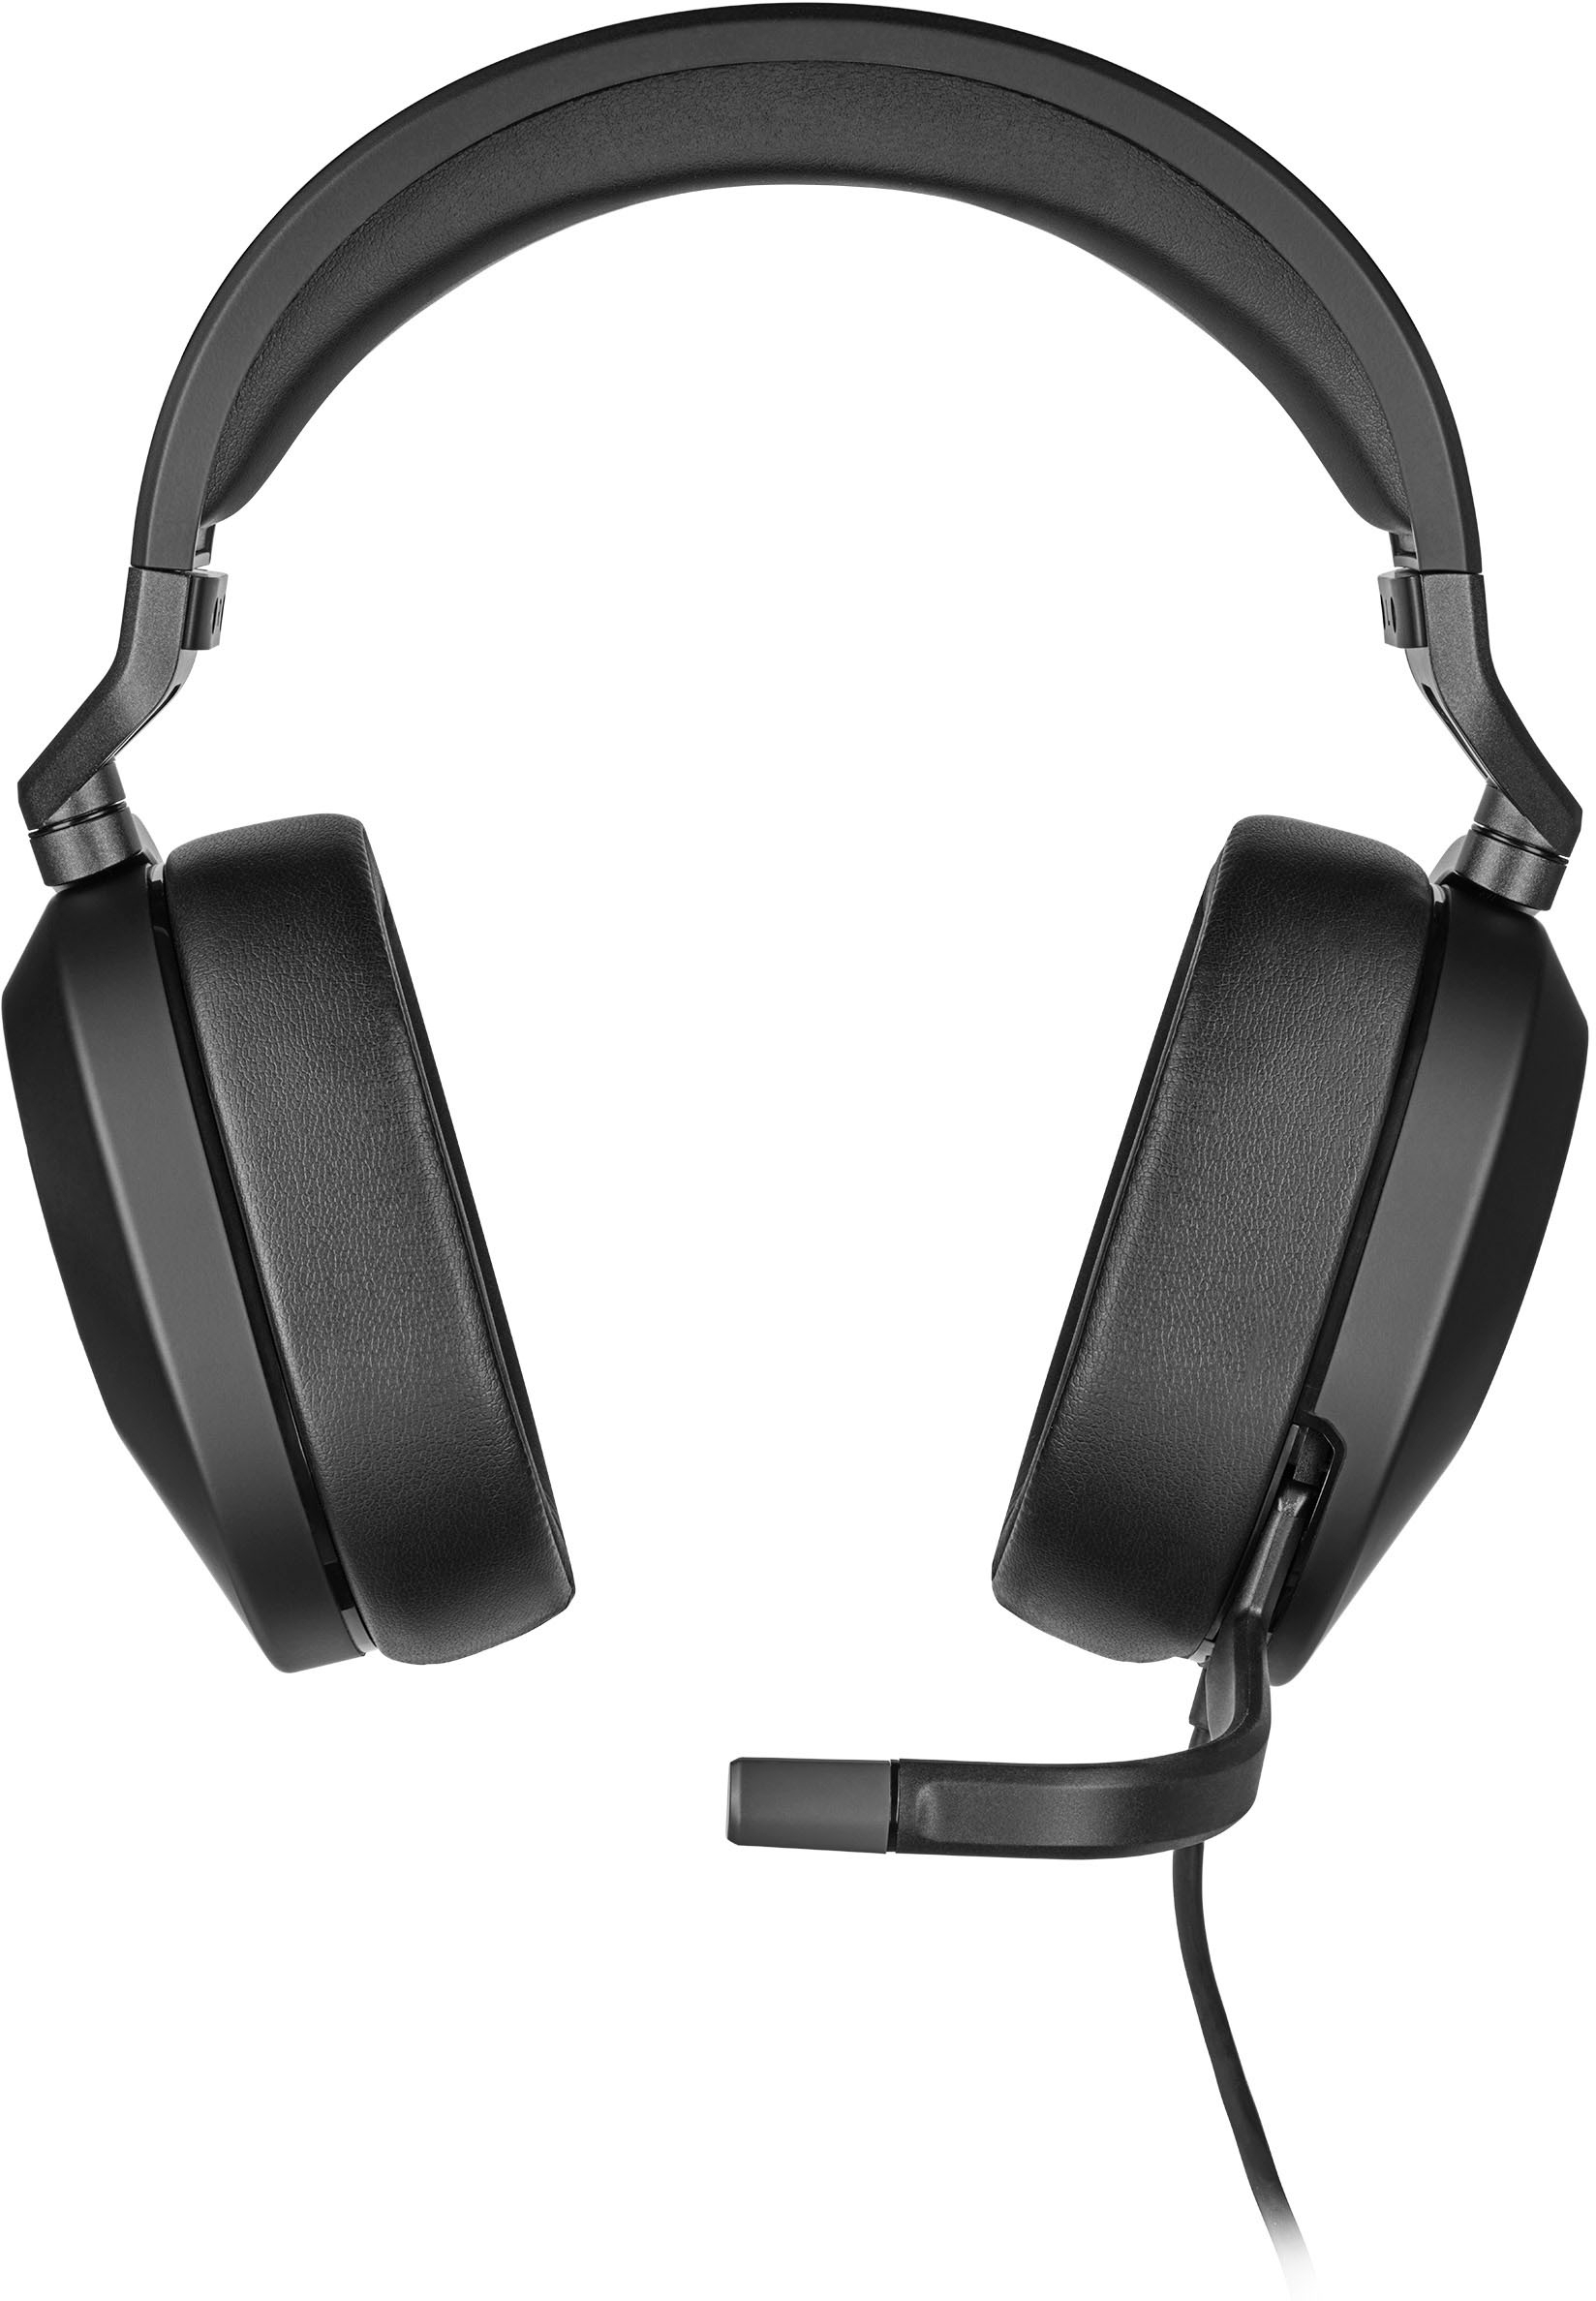 SURROUND Black PS5, Best for Buy PC, CA-9011270-NA and - Headset HS65 PS4 CORSAIR Wired Gaming